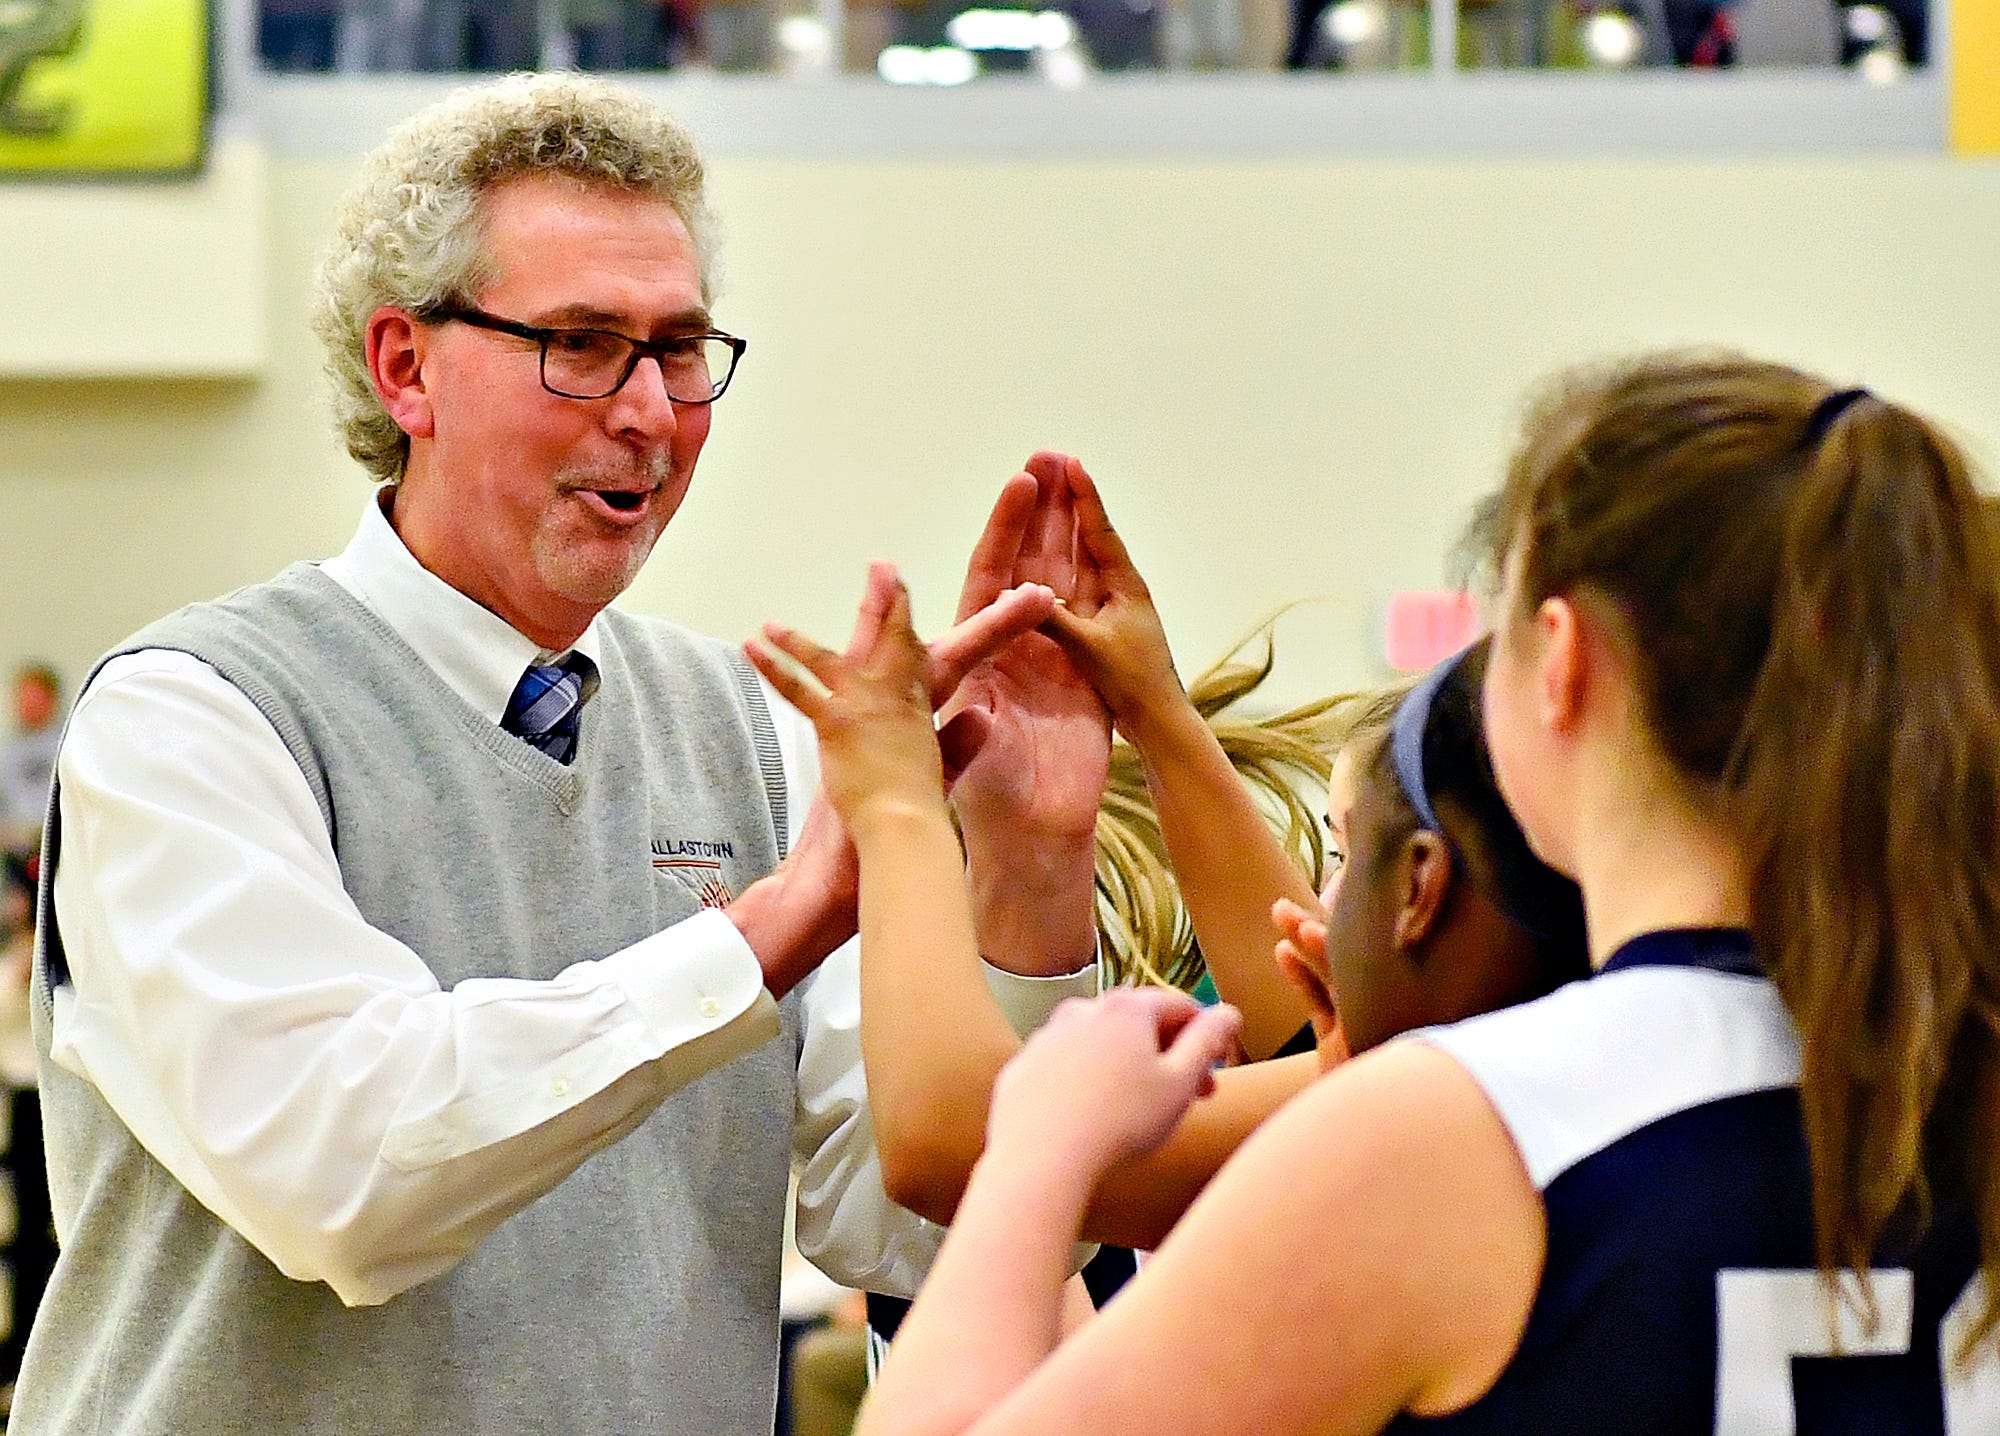 Dallastown's Head Coach Jay Rexroth hands out high-fives on the sideline with seconds on the clock during YAIAA girls' basketball championship action against Gettysburg at Grumbacher Sport and Fitness Center at York College of Pennsylvania in Spring Garden Township, Friday, Feb. 14, 2020. Dallastown would win the game 42-38. Dawn J. Sagert photo